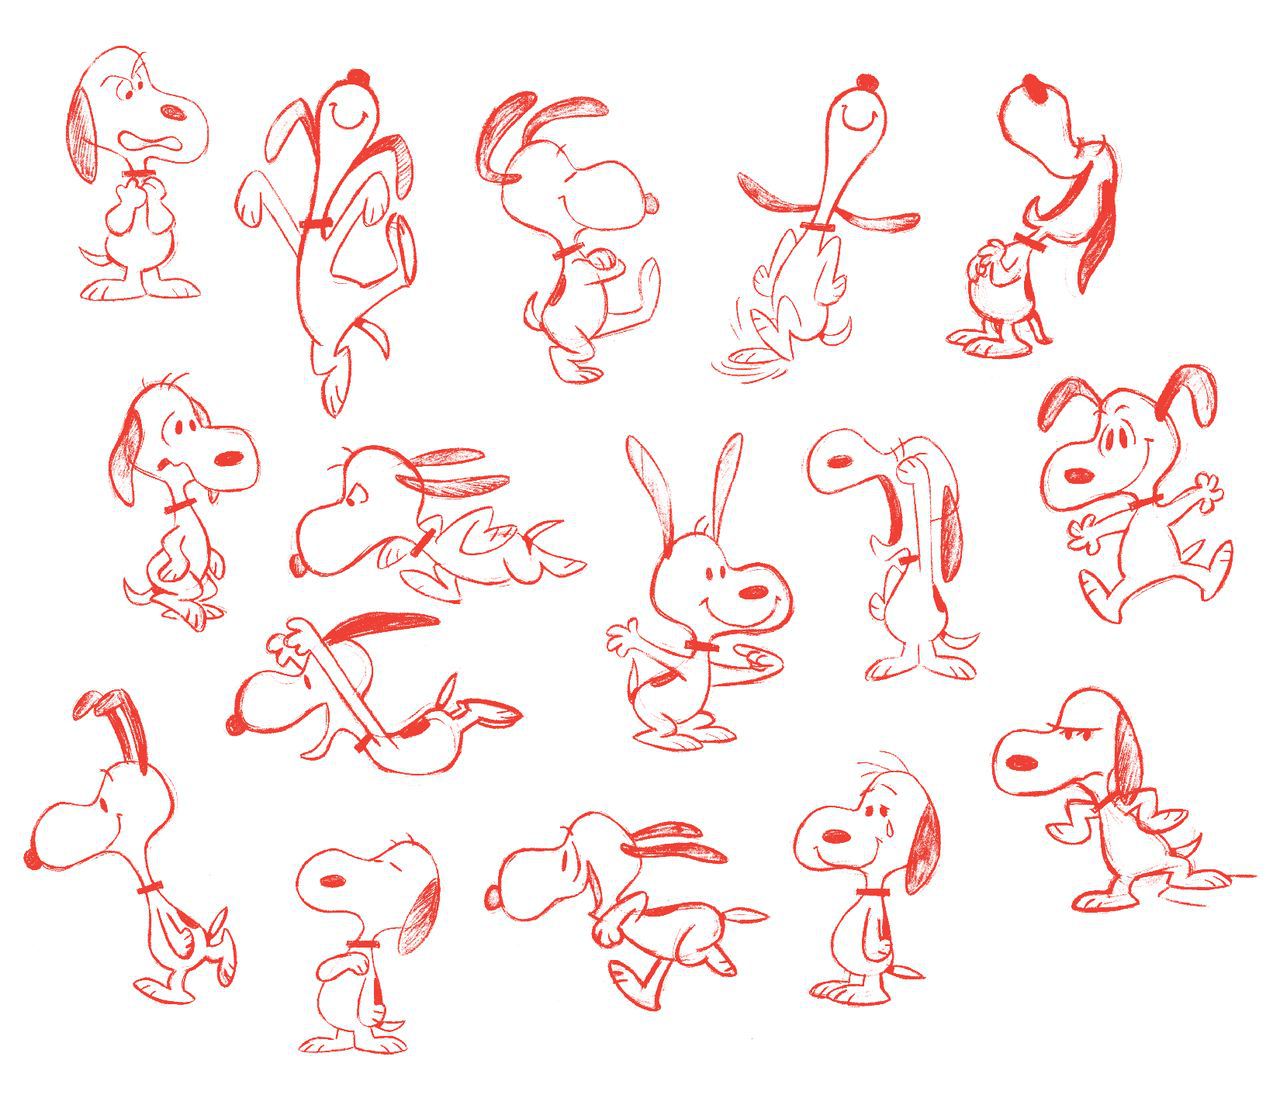 The Art and Making of Peanuts Animation 4